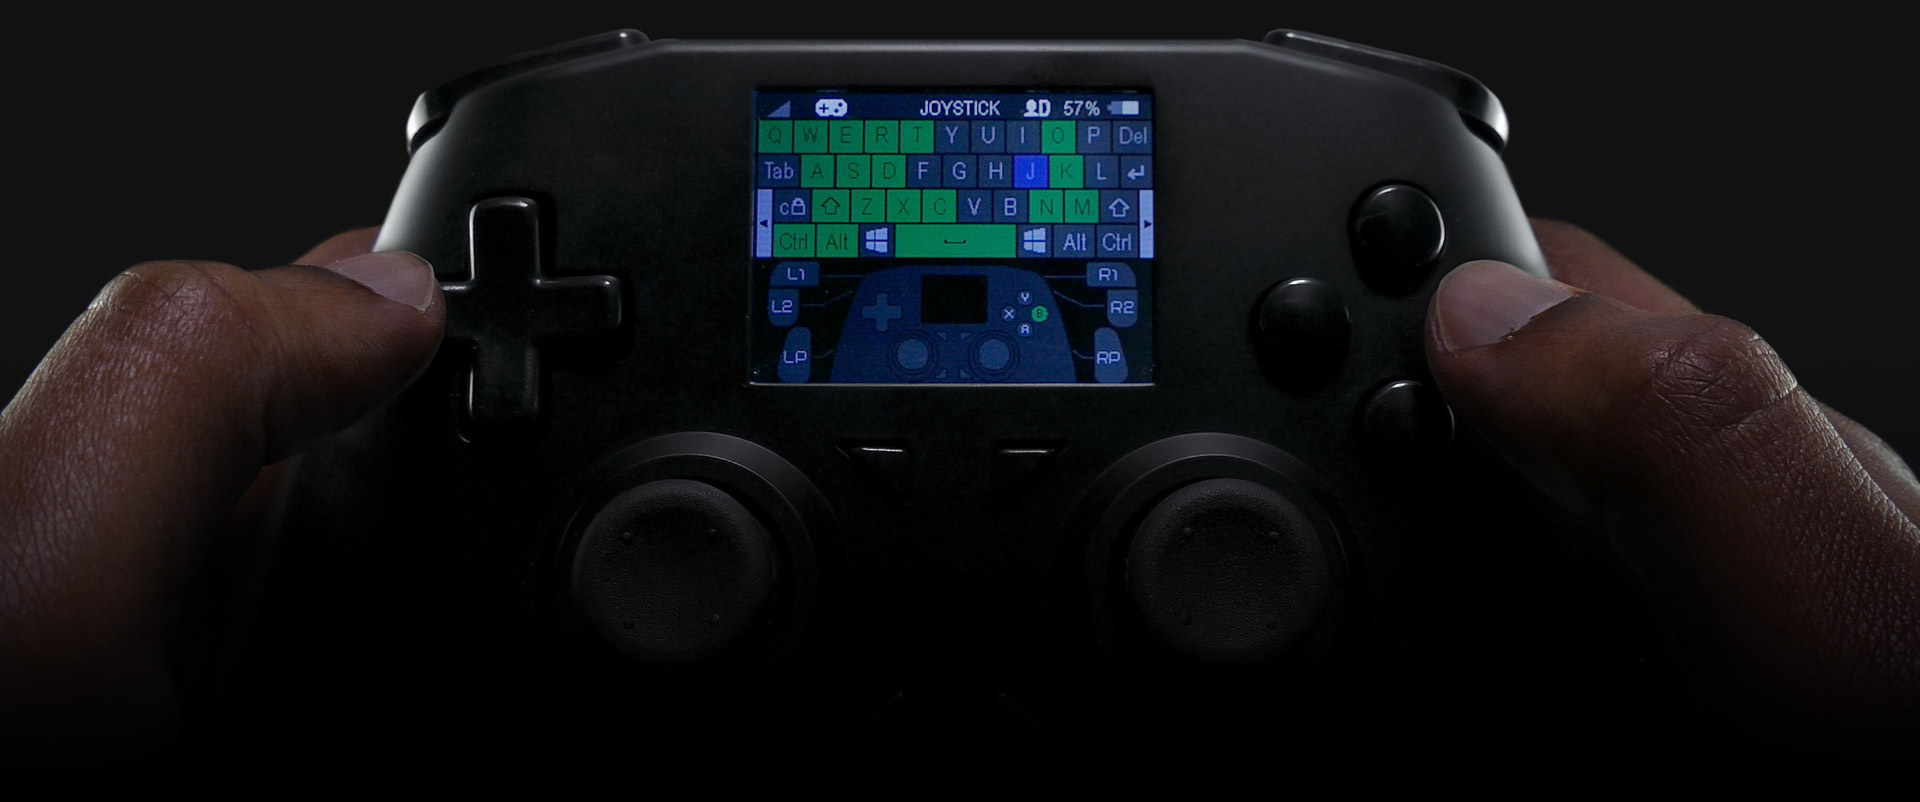 Home - ALL Controller | The World’s First Universal Gamepad - 1920 x 802 jpeg 150kB